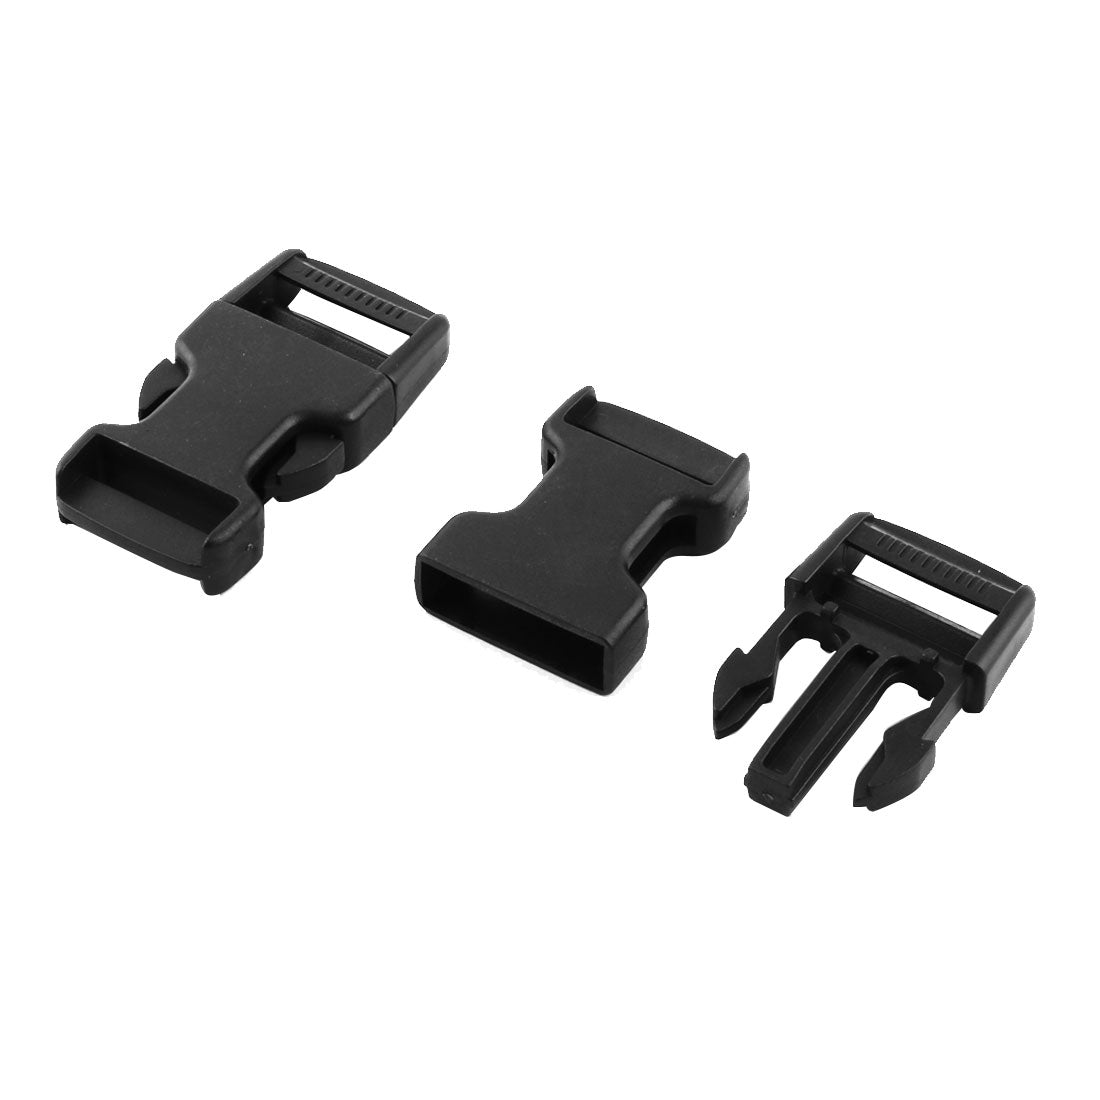 uxcell Uxcell Backpack Bag Strap Plastic Side Quick Release Buckle Black 34mm Width 2pcs